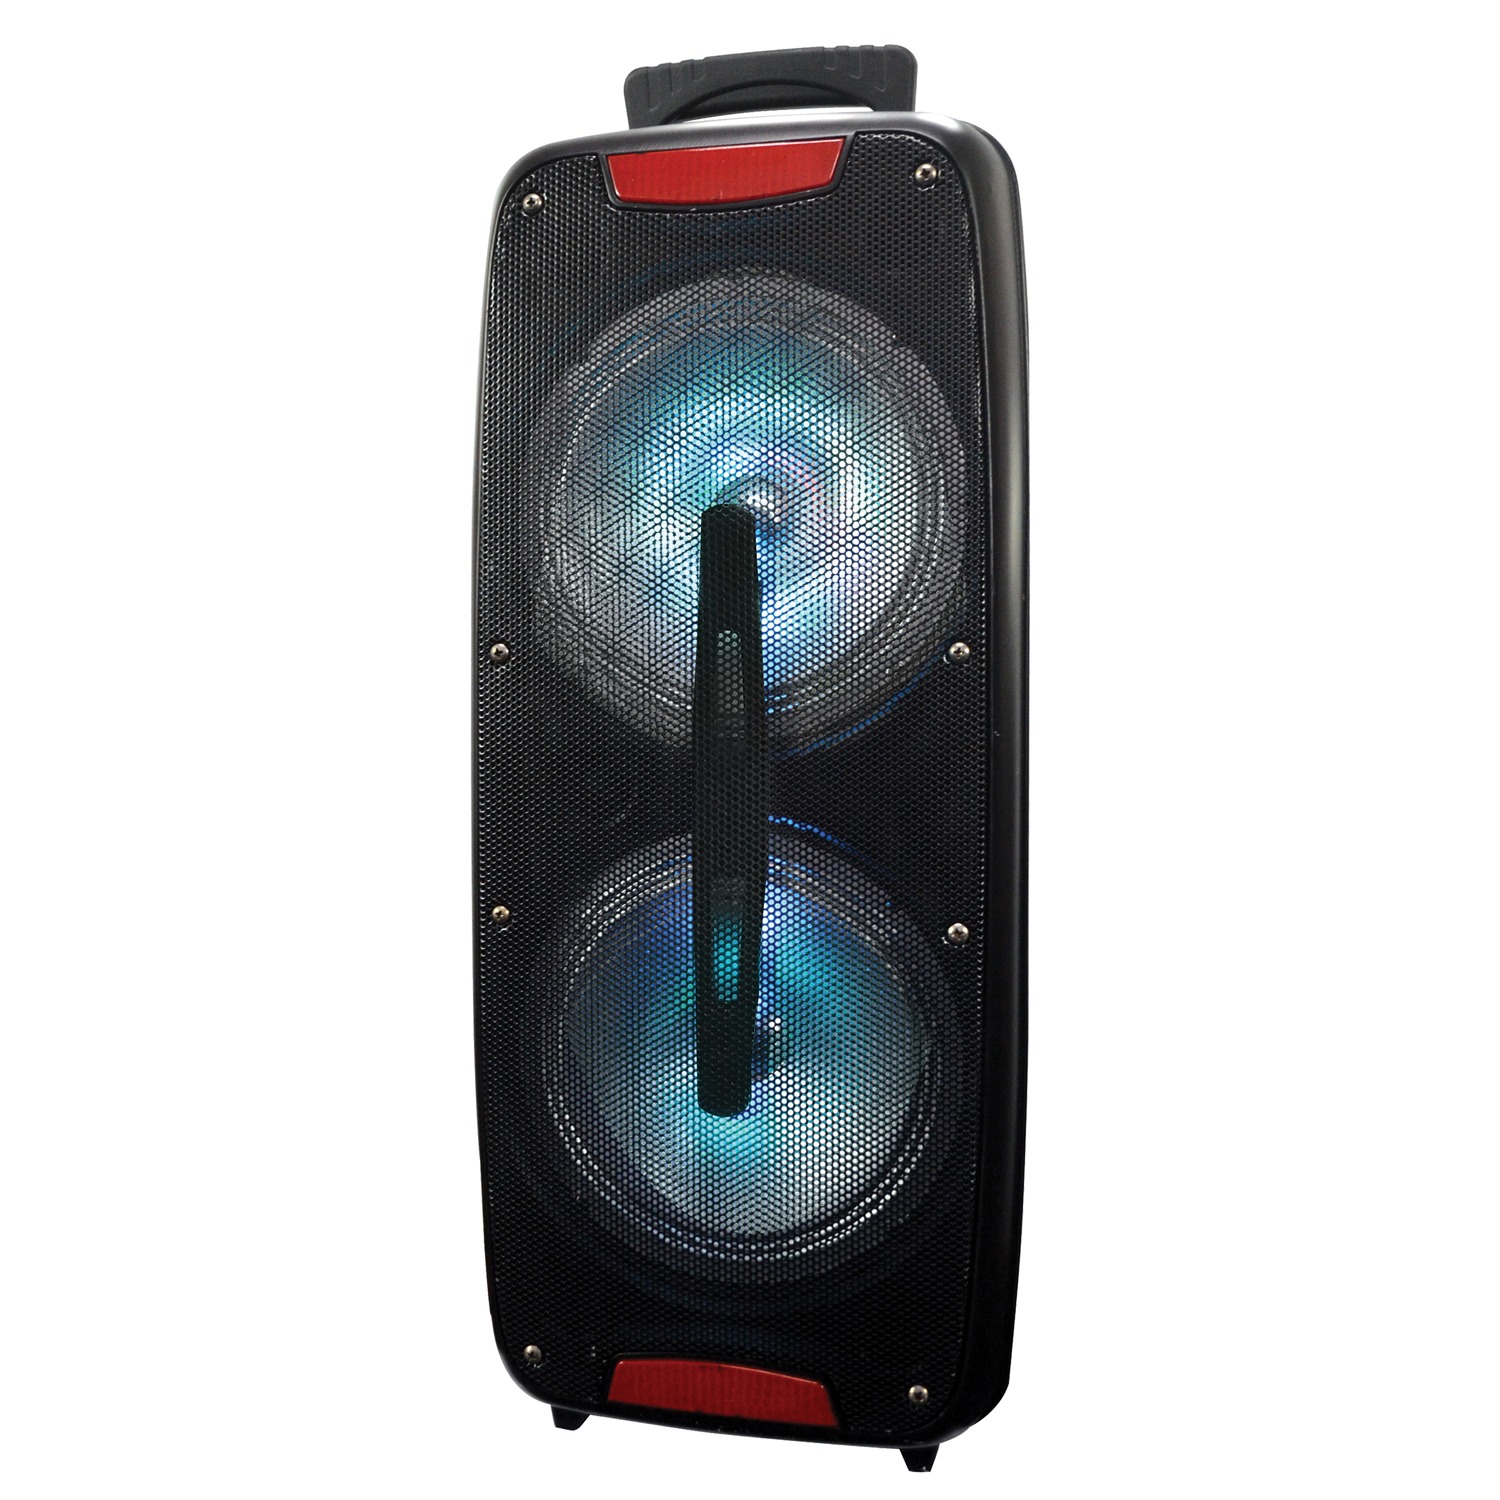 Supersonic Dual 8-inch Speaker With True Technology (black) - image 1 of 2